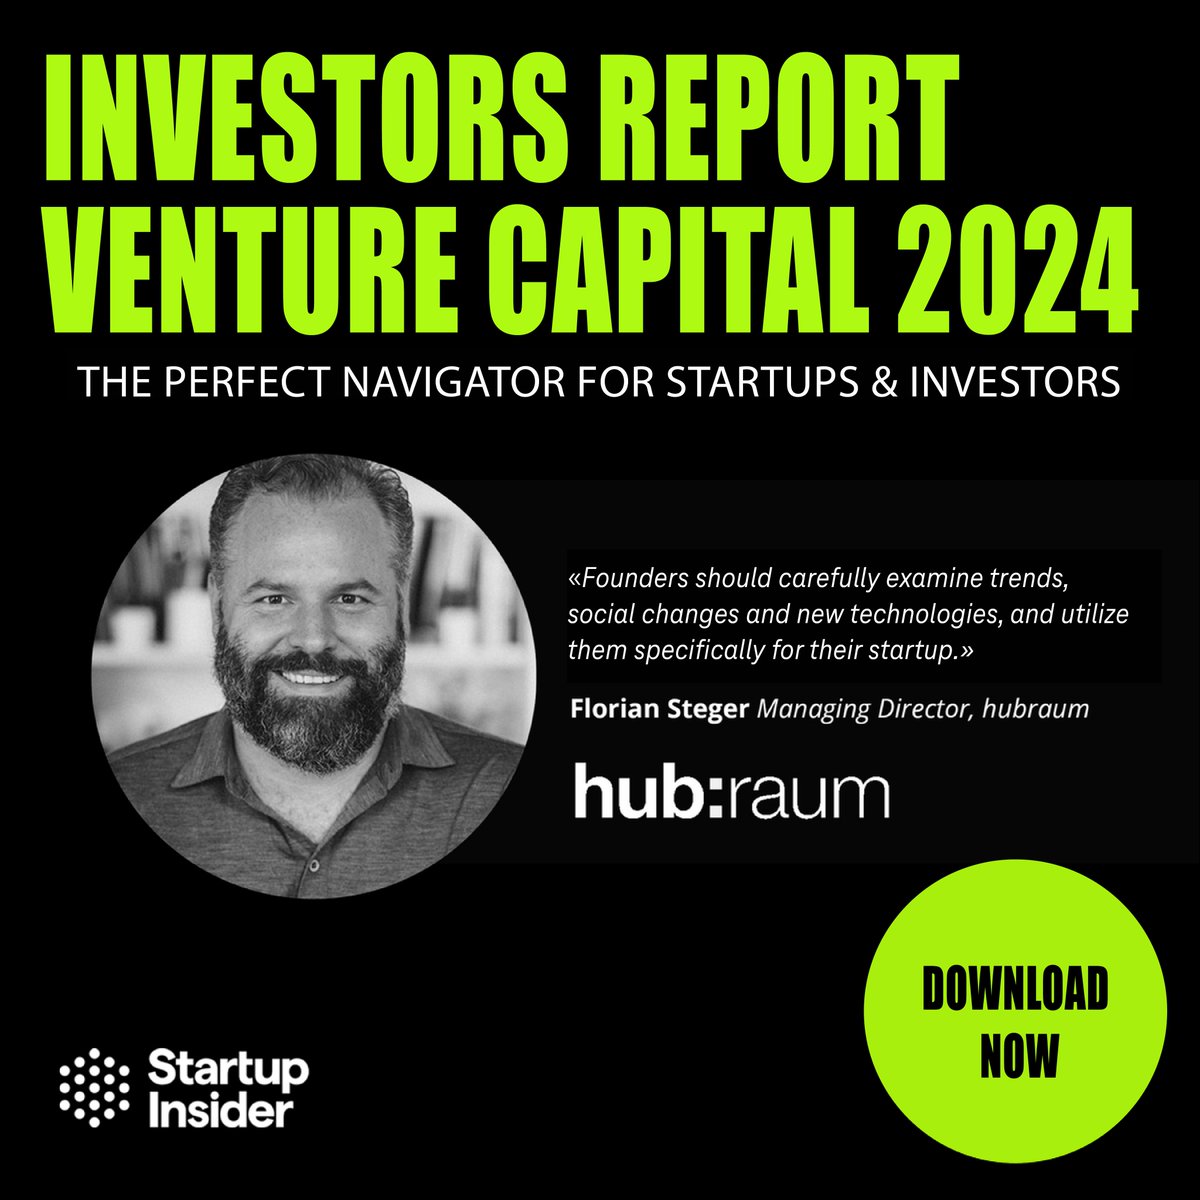 #Startups, all insights you need for your next #funding are in Startup Insider's #VC Navigator 2024! Get acquainted with DACH's most engaged VCs, deal counts, investment stages, focus areas, and much more. We're delighted to be featured! Download here: bit.ly/441FEMl